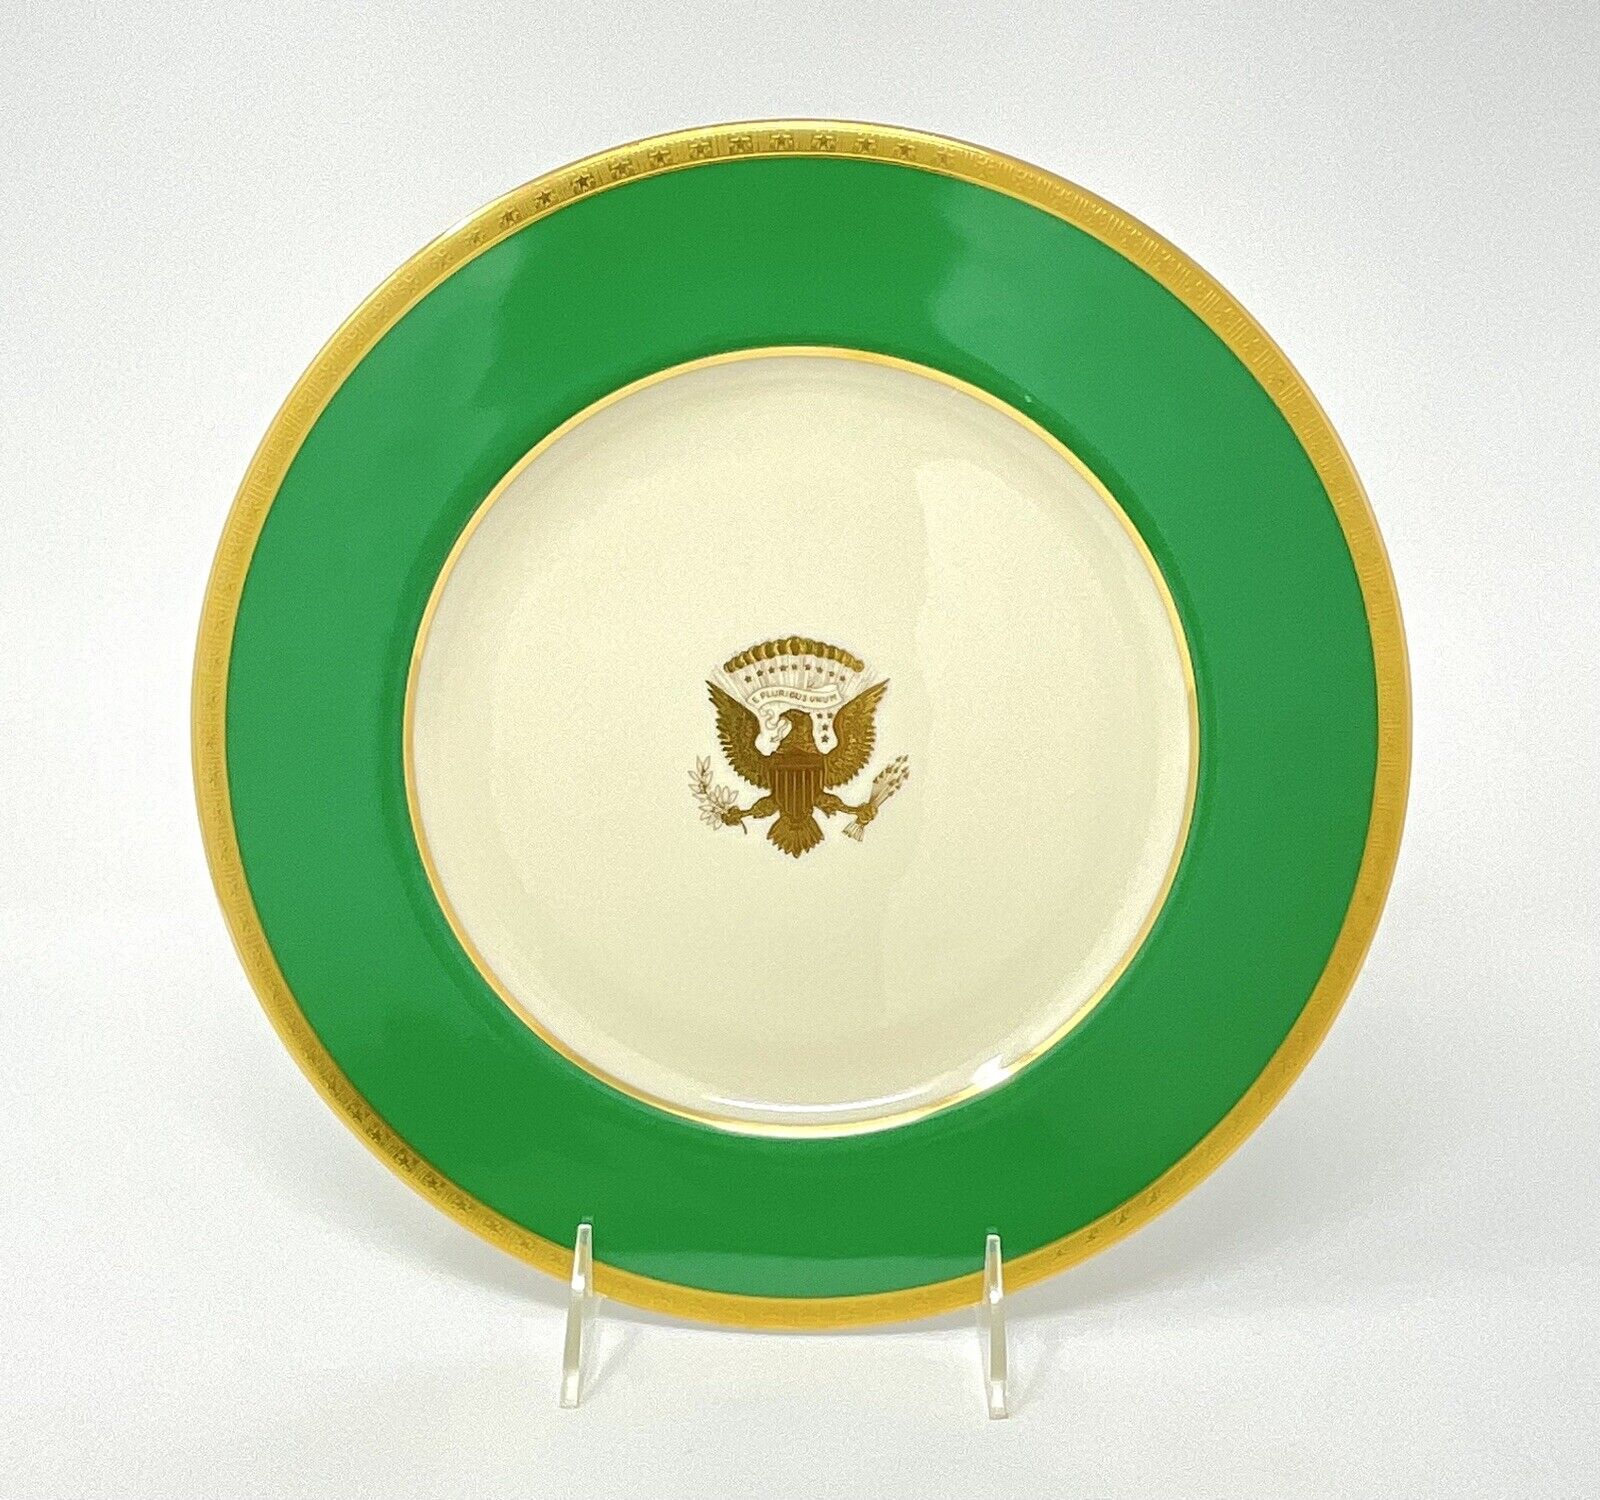 Lenox Jimmy Carter Presidential White House China Service Dinner Plate EXCE.